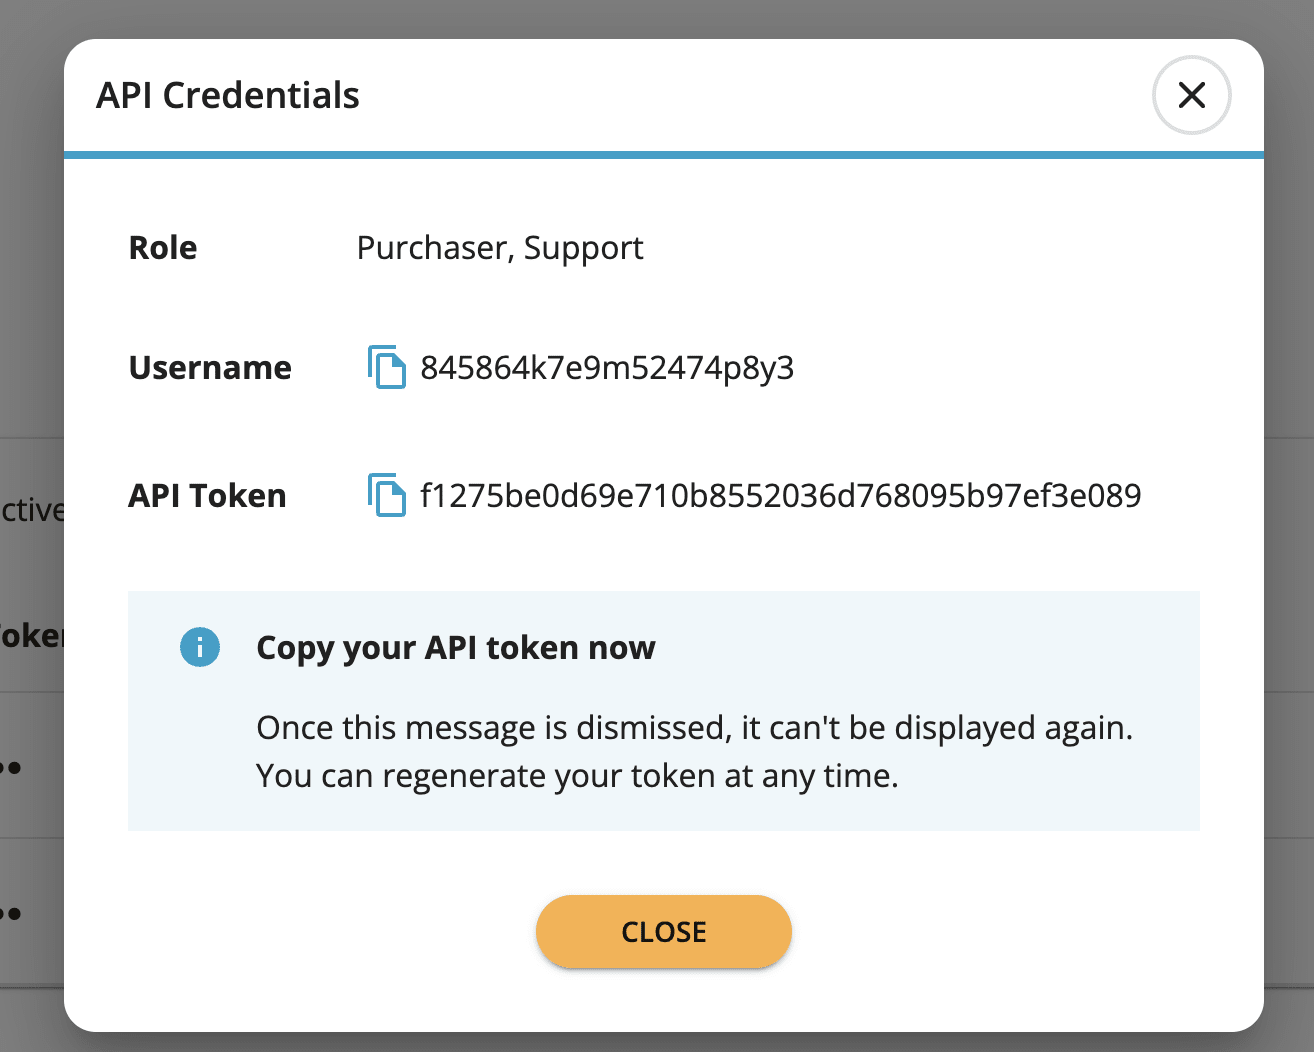 You will be presented with the API Credentials window that will only be presented once. These credentials cannot be recovered, but can be disabled. However, new tokens can be regenerated at any time.